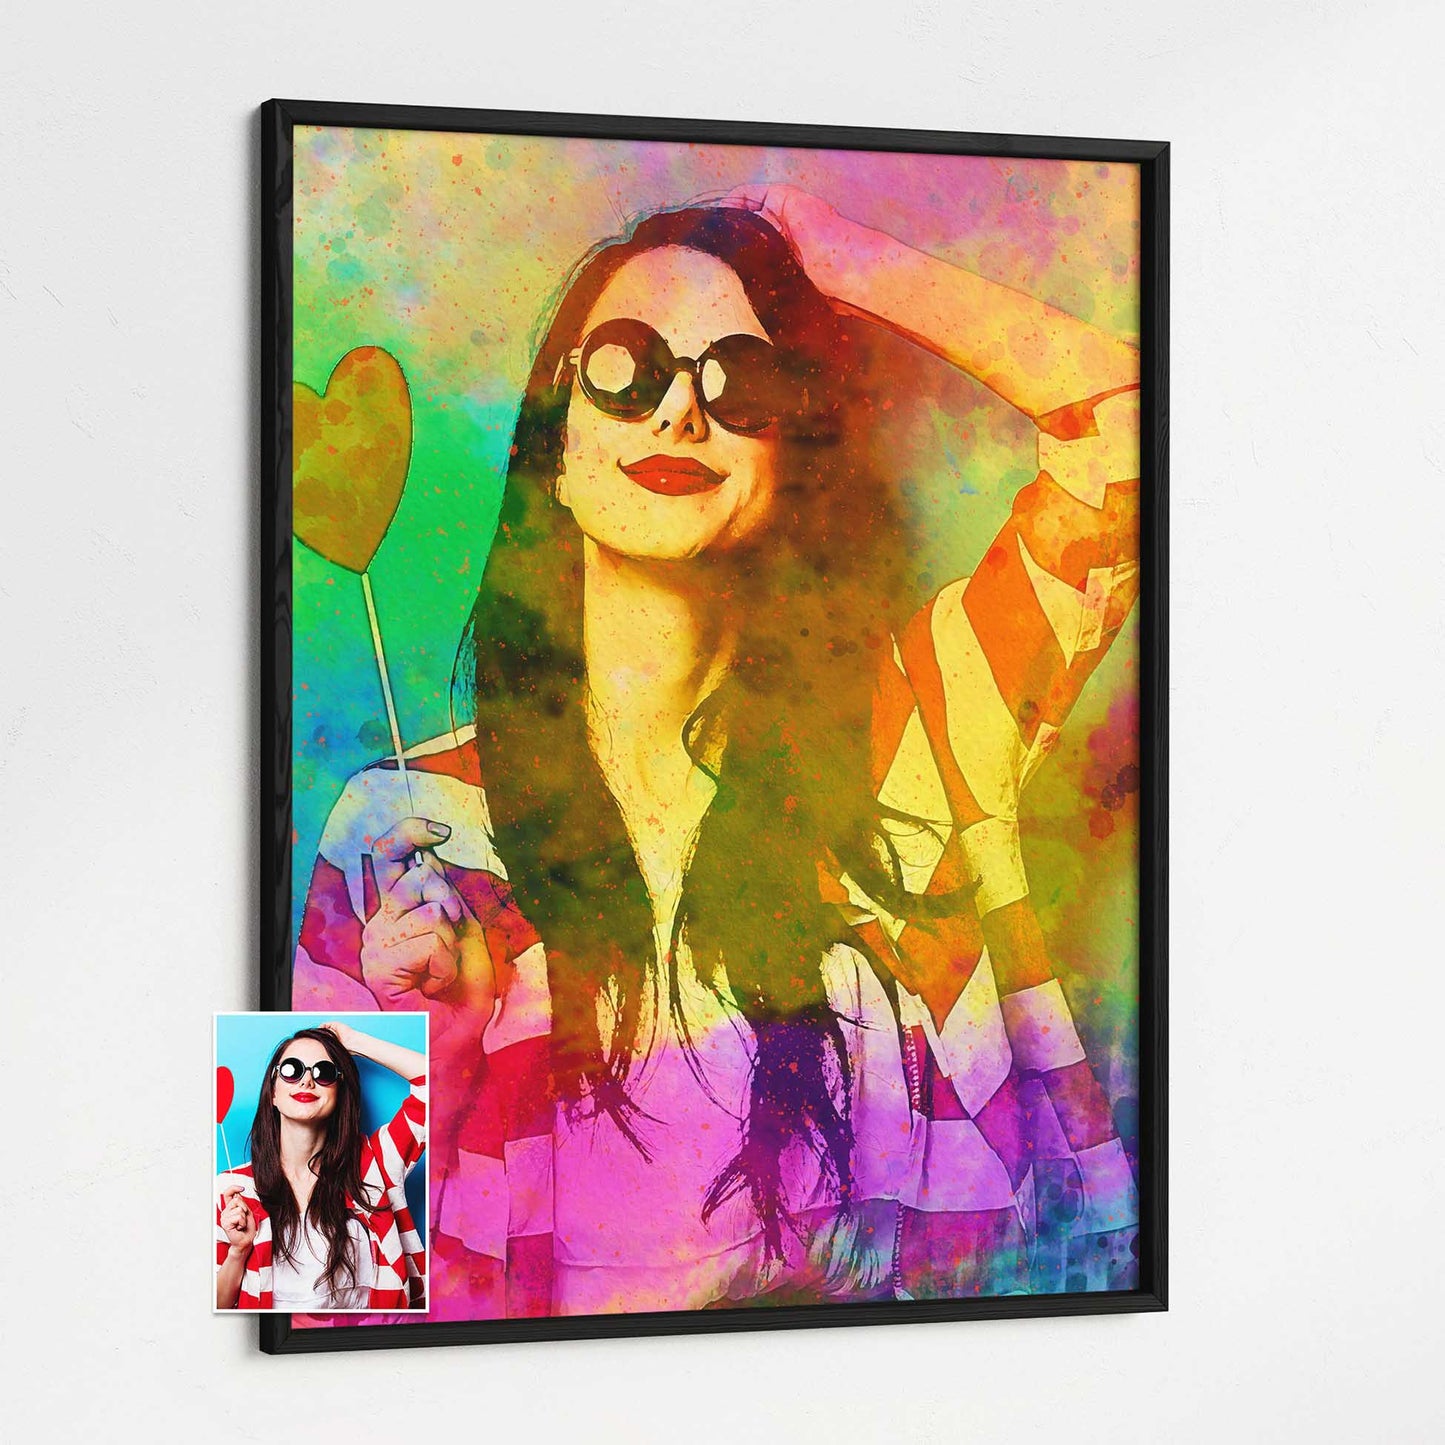 Step into a world of creativity with the Personalised Splash of Colours Framed Print. With its fun and imaginative design, this gallery-quality artwork adds a burst of vibrant colors to your interior. Its wooden frame enhances art 